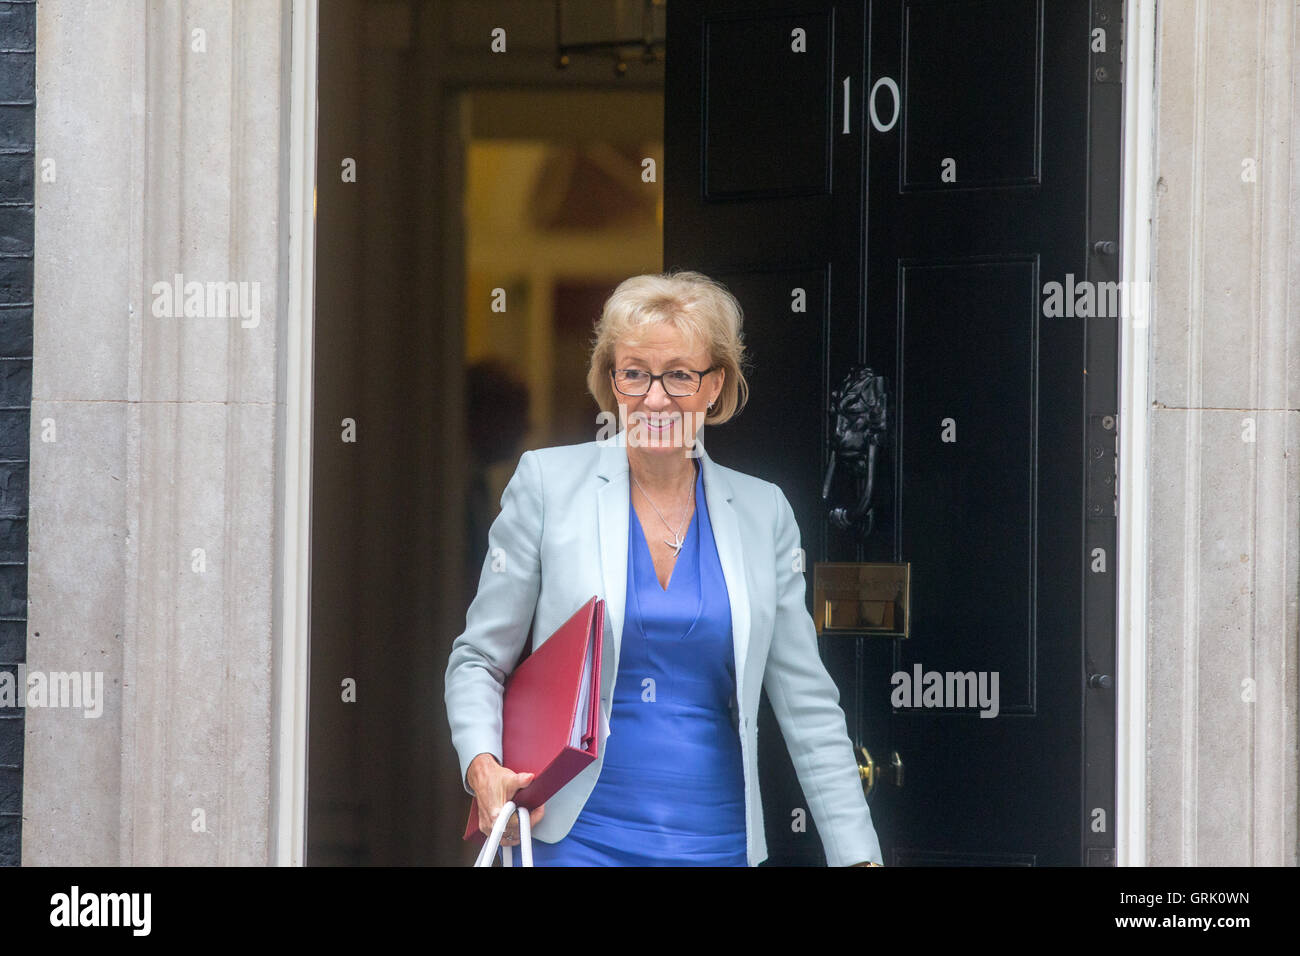 Andrea Leadsom,Minister of State for Environment,food and rural affairs leaves 10 Downing street after a Cabinet meeting Stock Photo